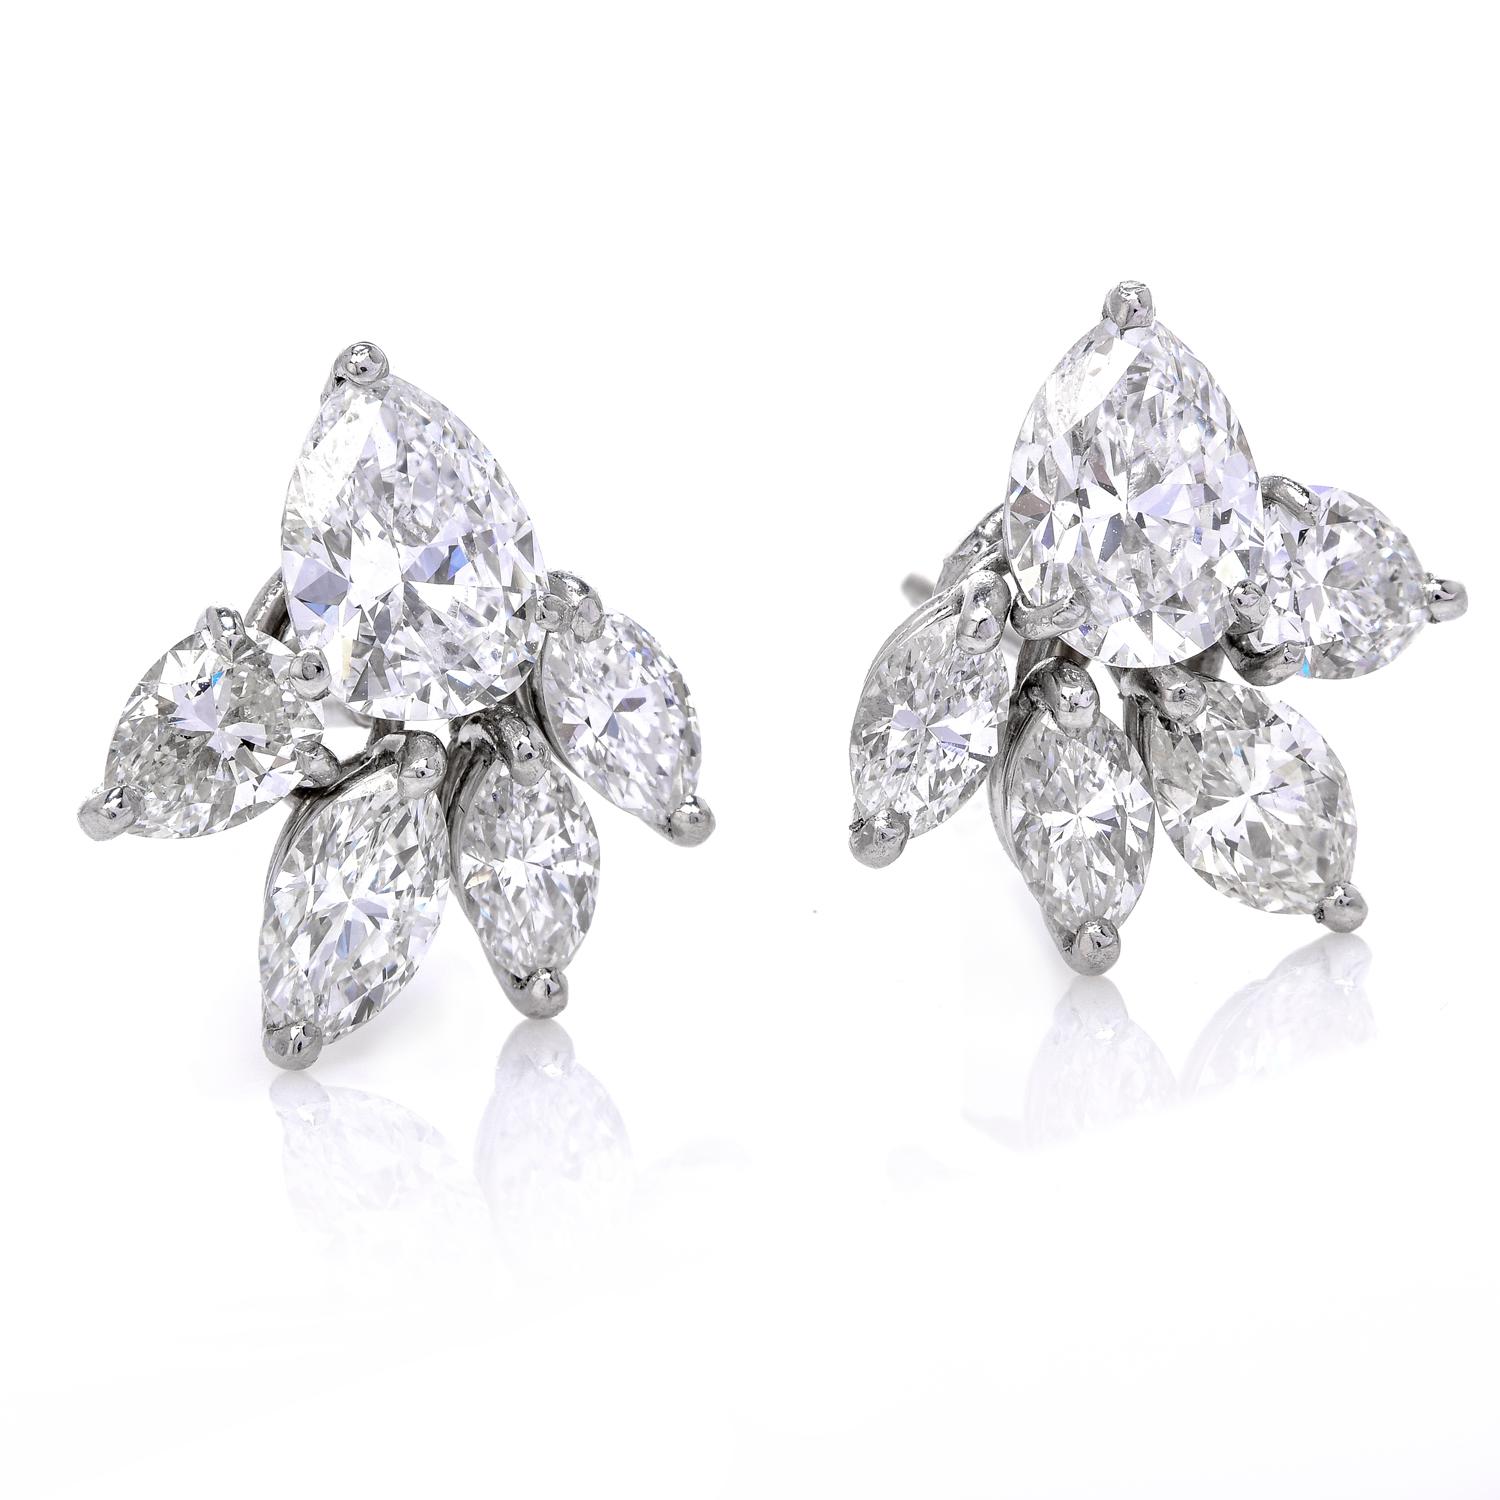 These exceptional earrings were inspired in a floral motif and crafted in  Luxurious Platinum.

Featuring two faceted large Pear shape diamonds in ears, weighing approx 0.86 carats and 0.96 carats. Both pear diamonds are GIA graded, D Color, SI1